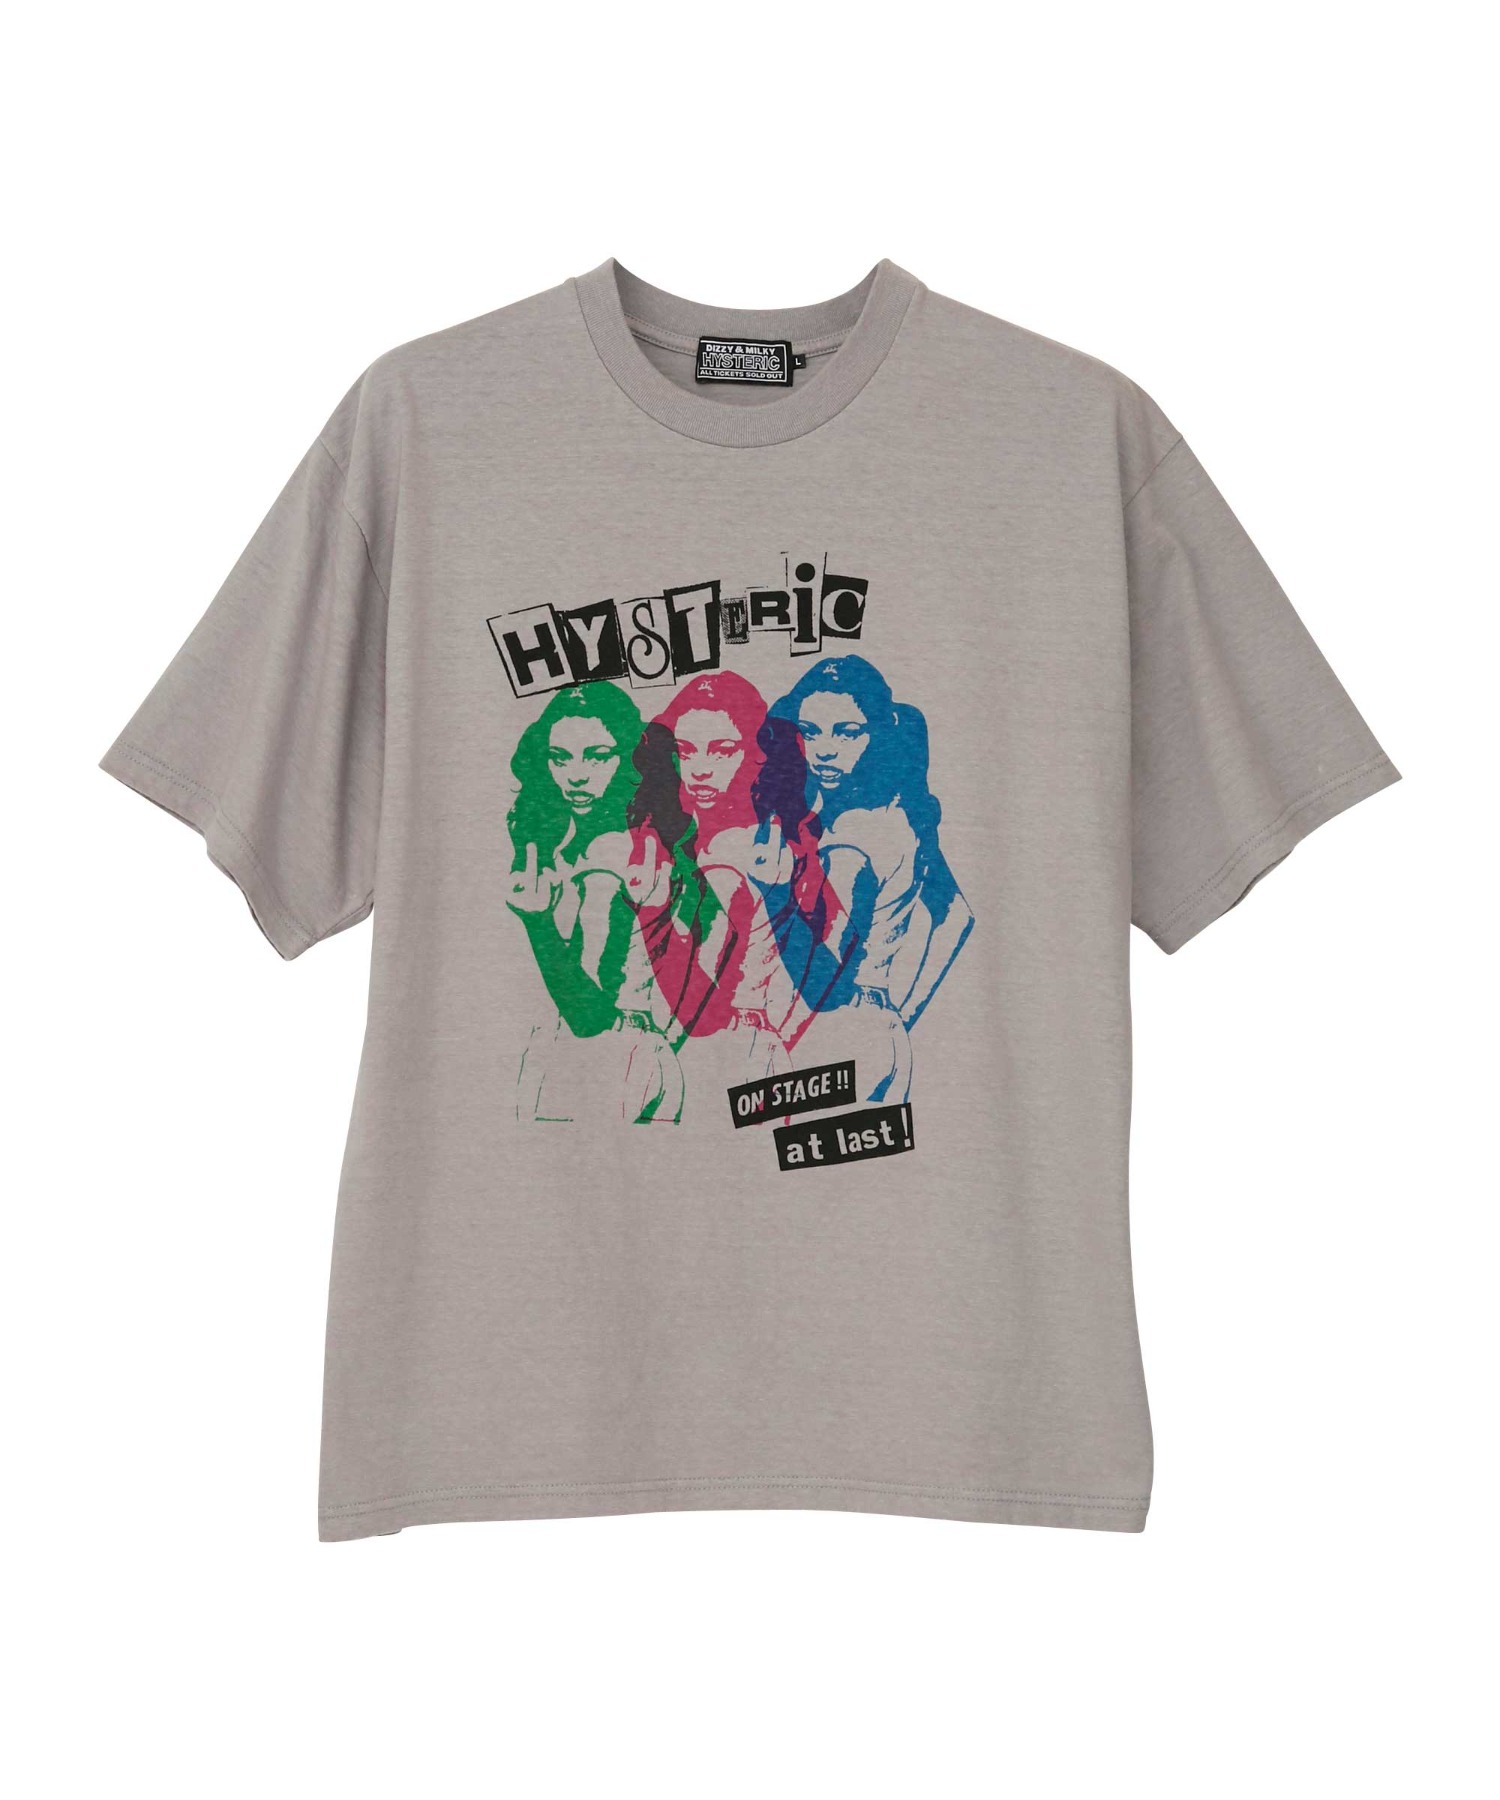 HYSTERIC ON STAGE Tシャツ